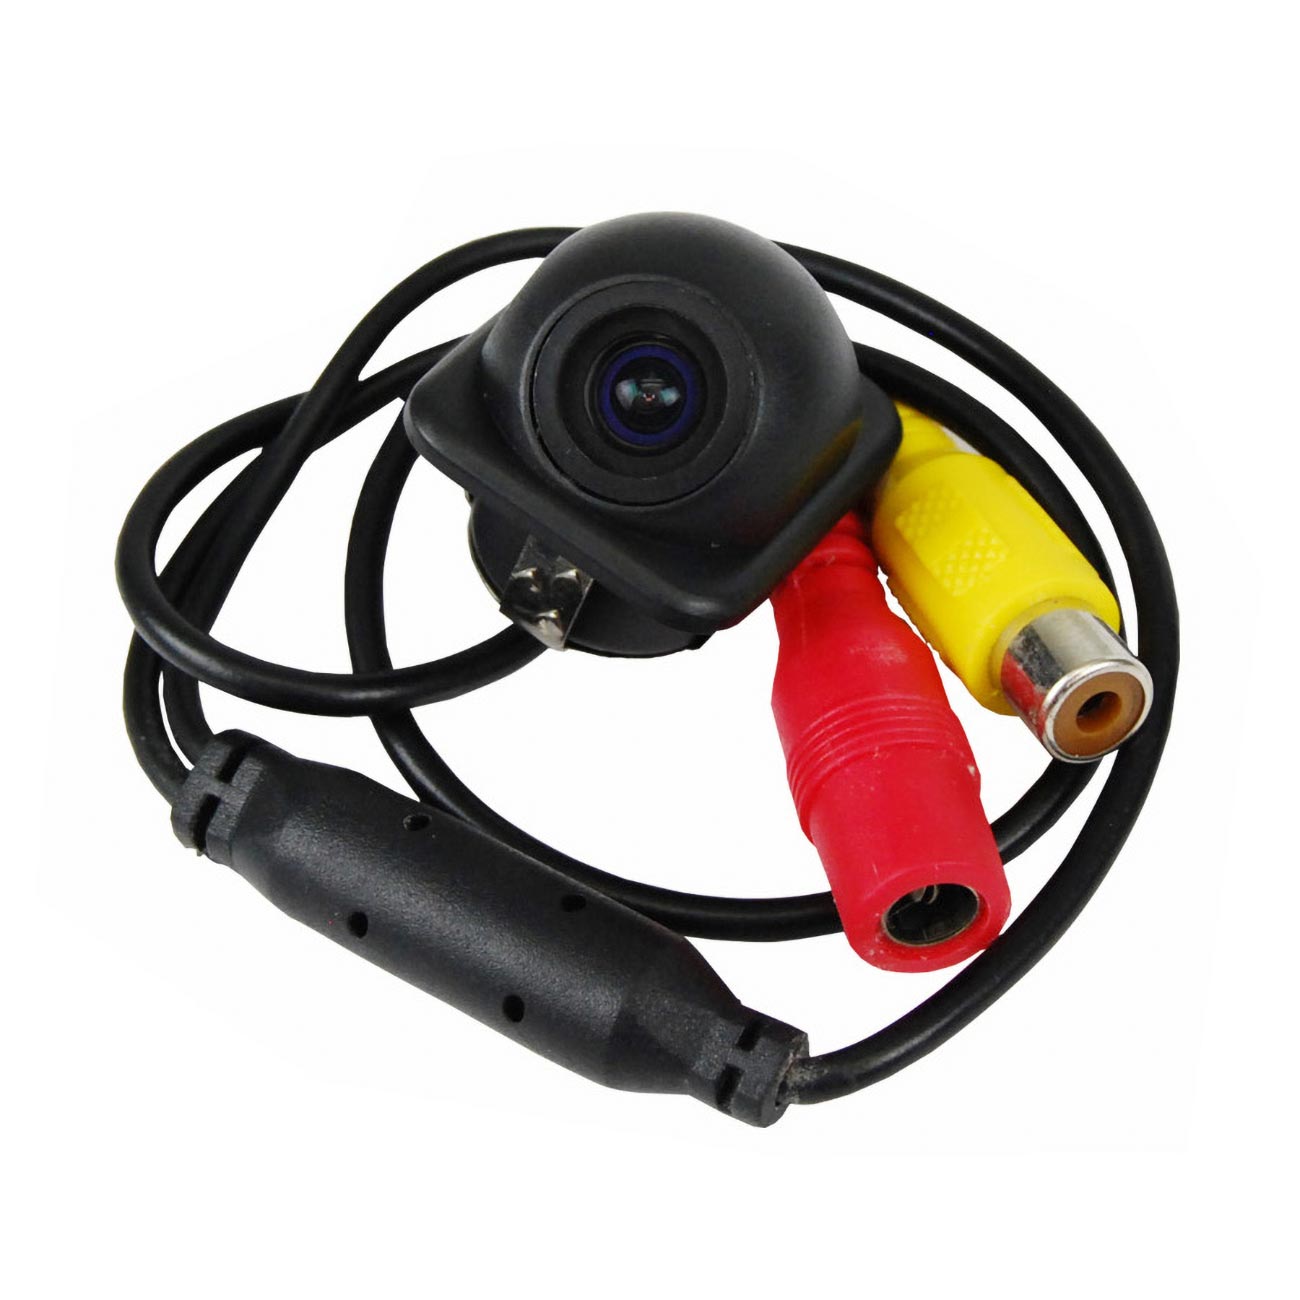 Pipeman's InstallSolution Car Review Camera with Grid Lines